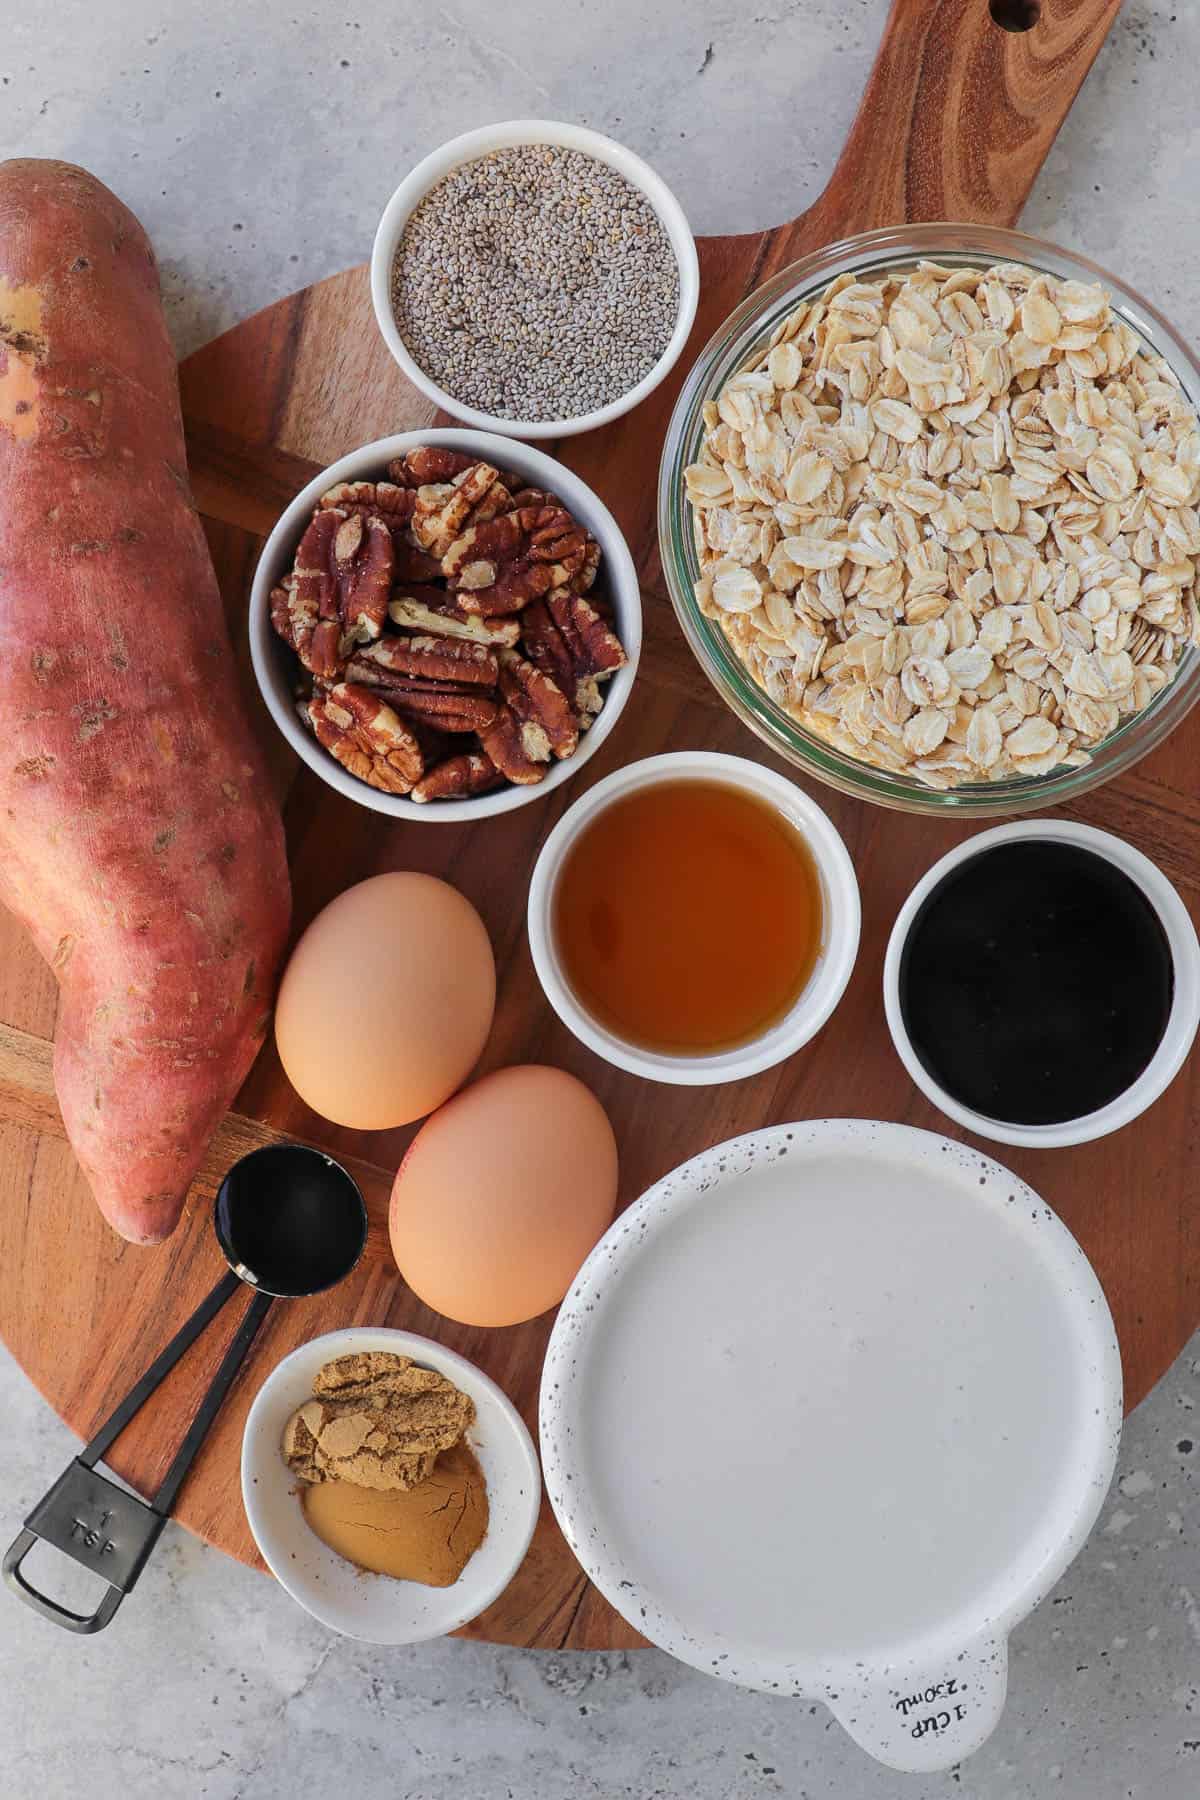 Ingredients for the recipe.